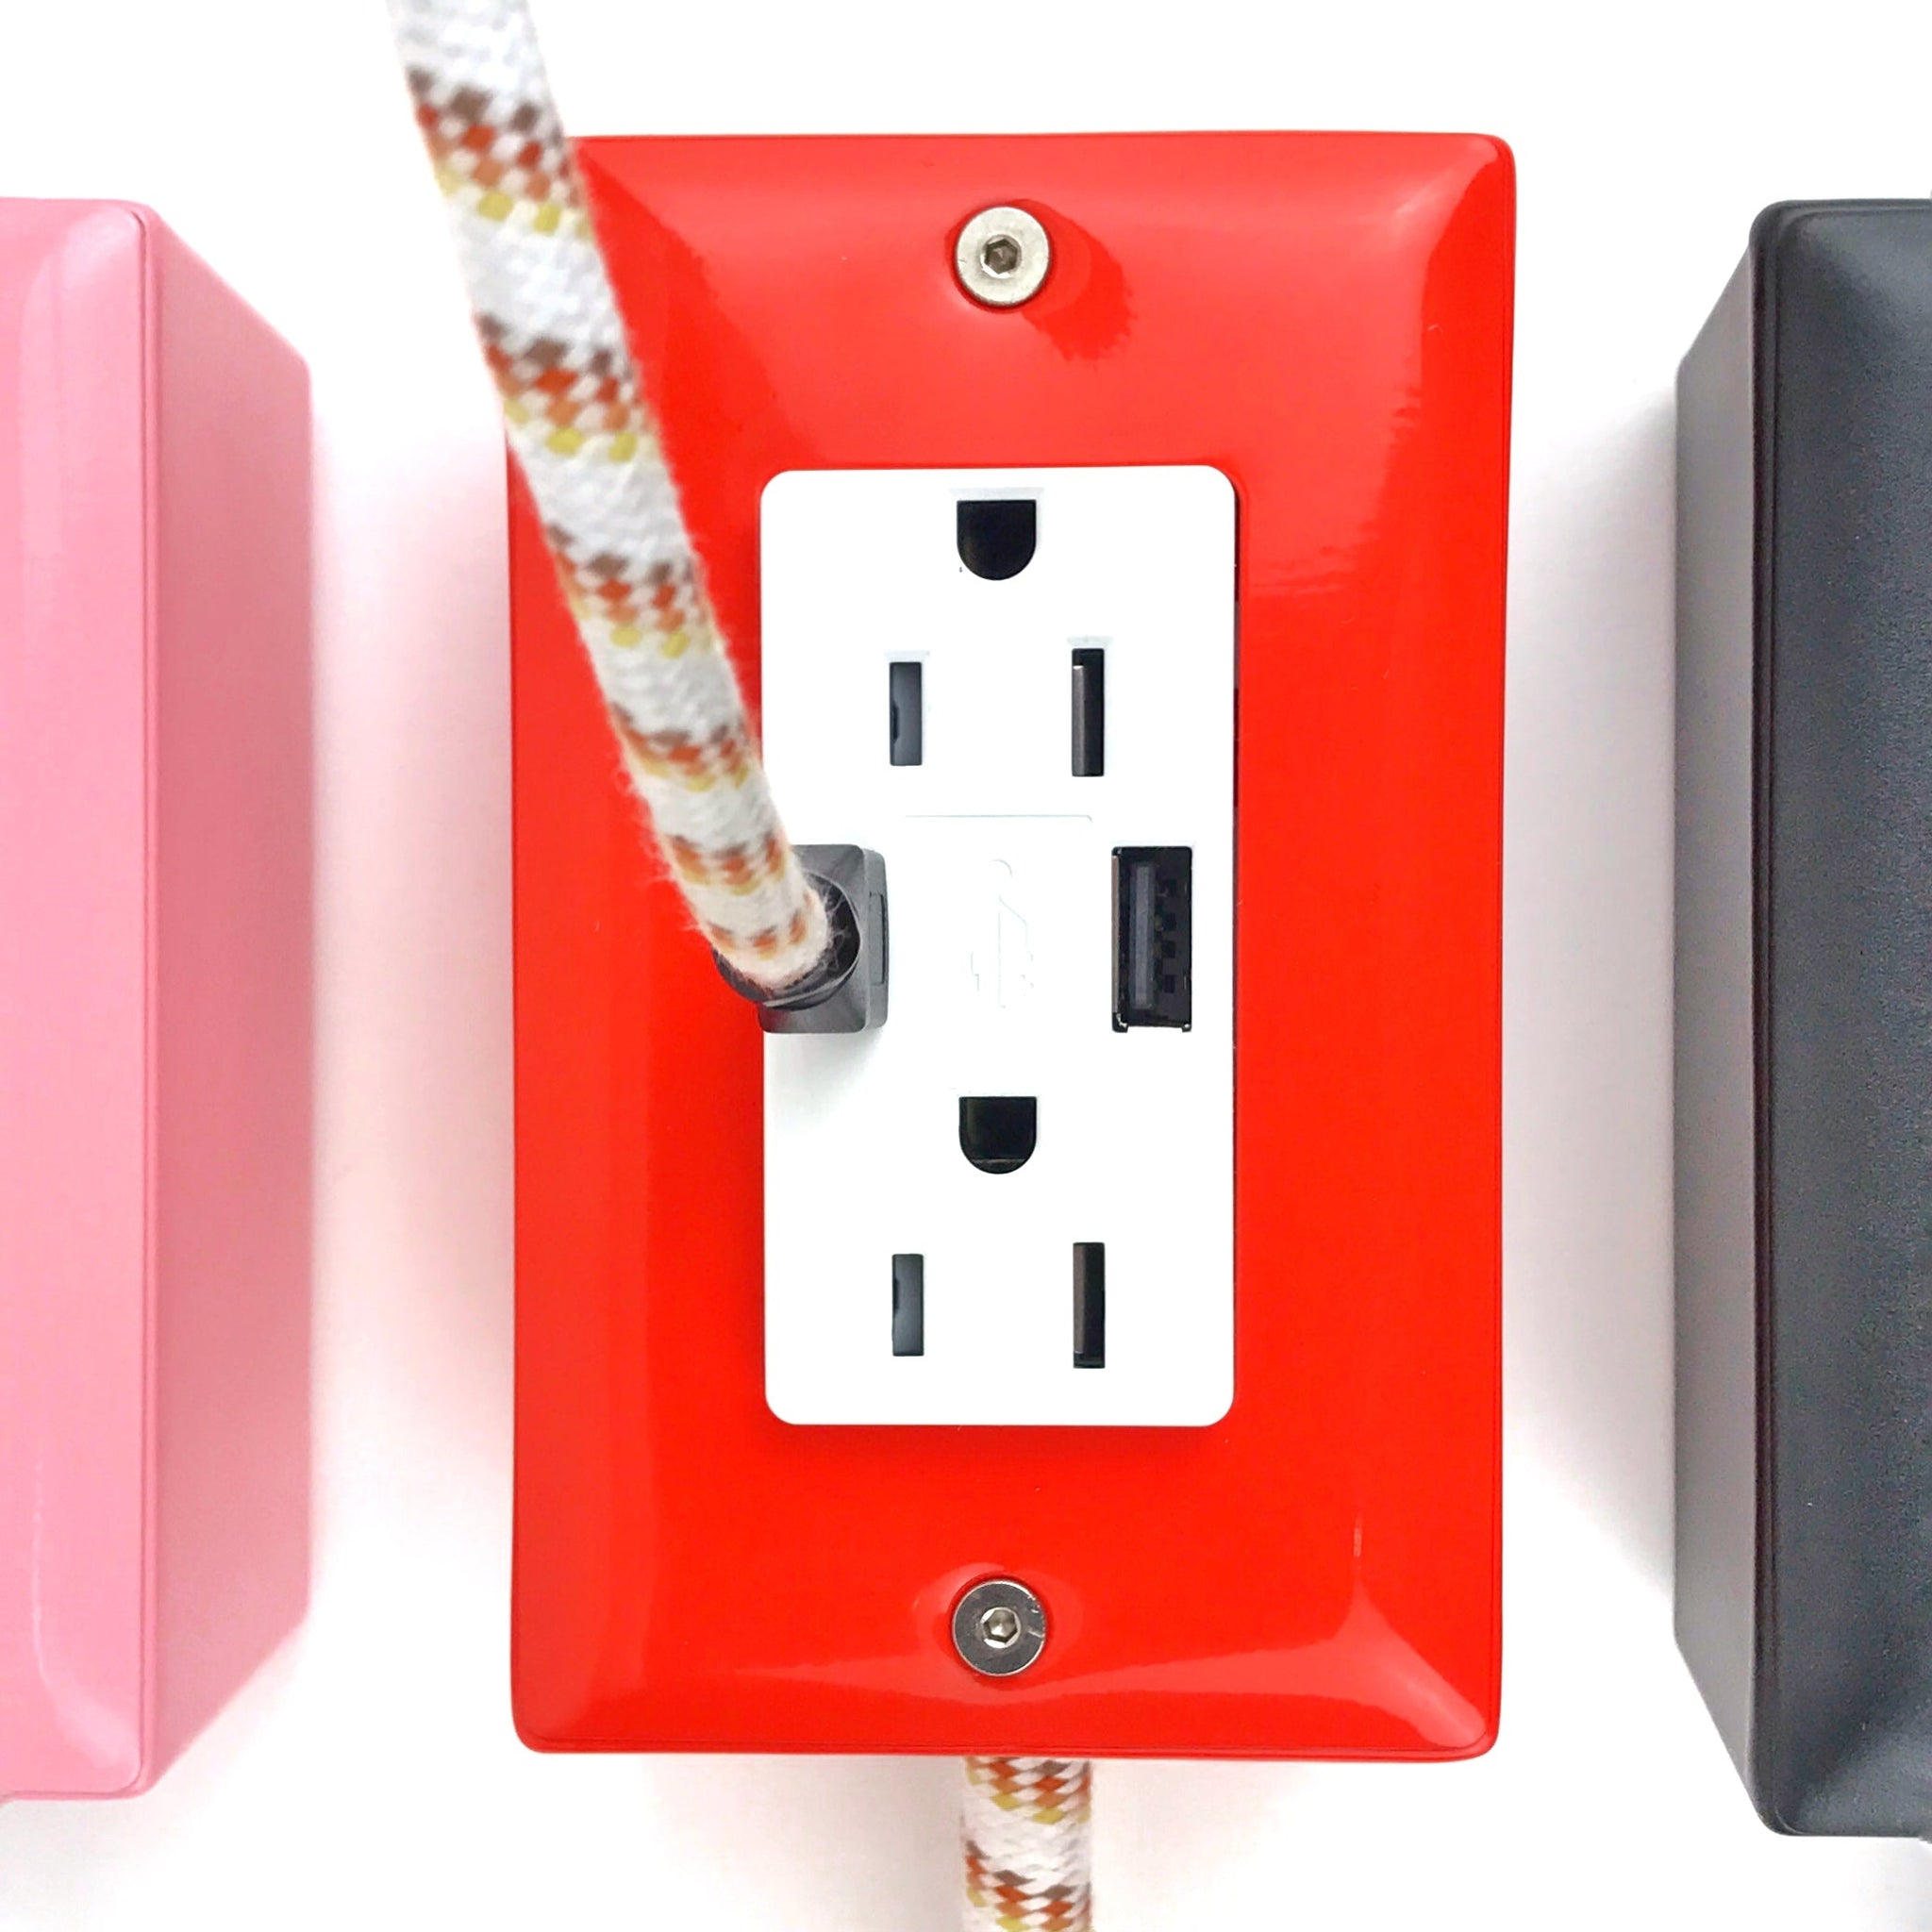 New! The First Smart Chip USB Type C® Extension Cord - 8ft Extō USBC Dual-Outlet Power Cord Candy Pink